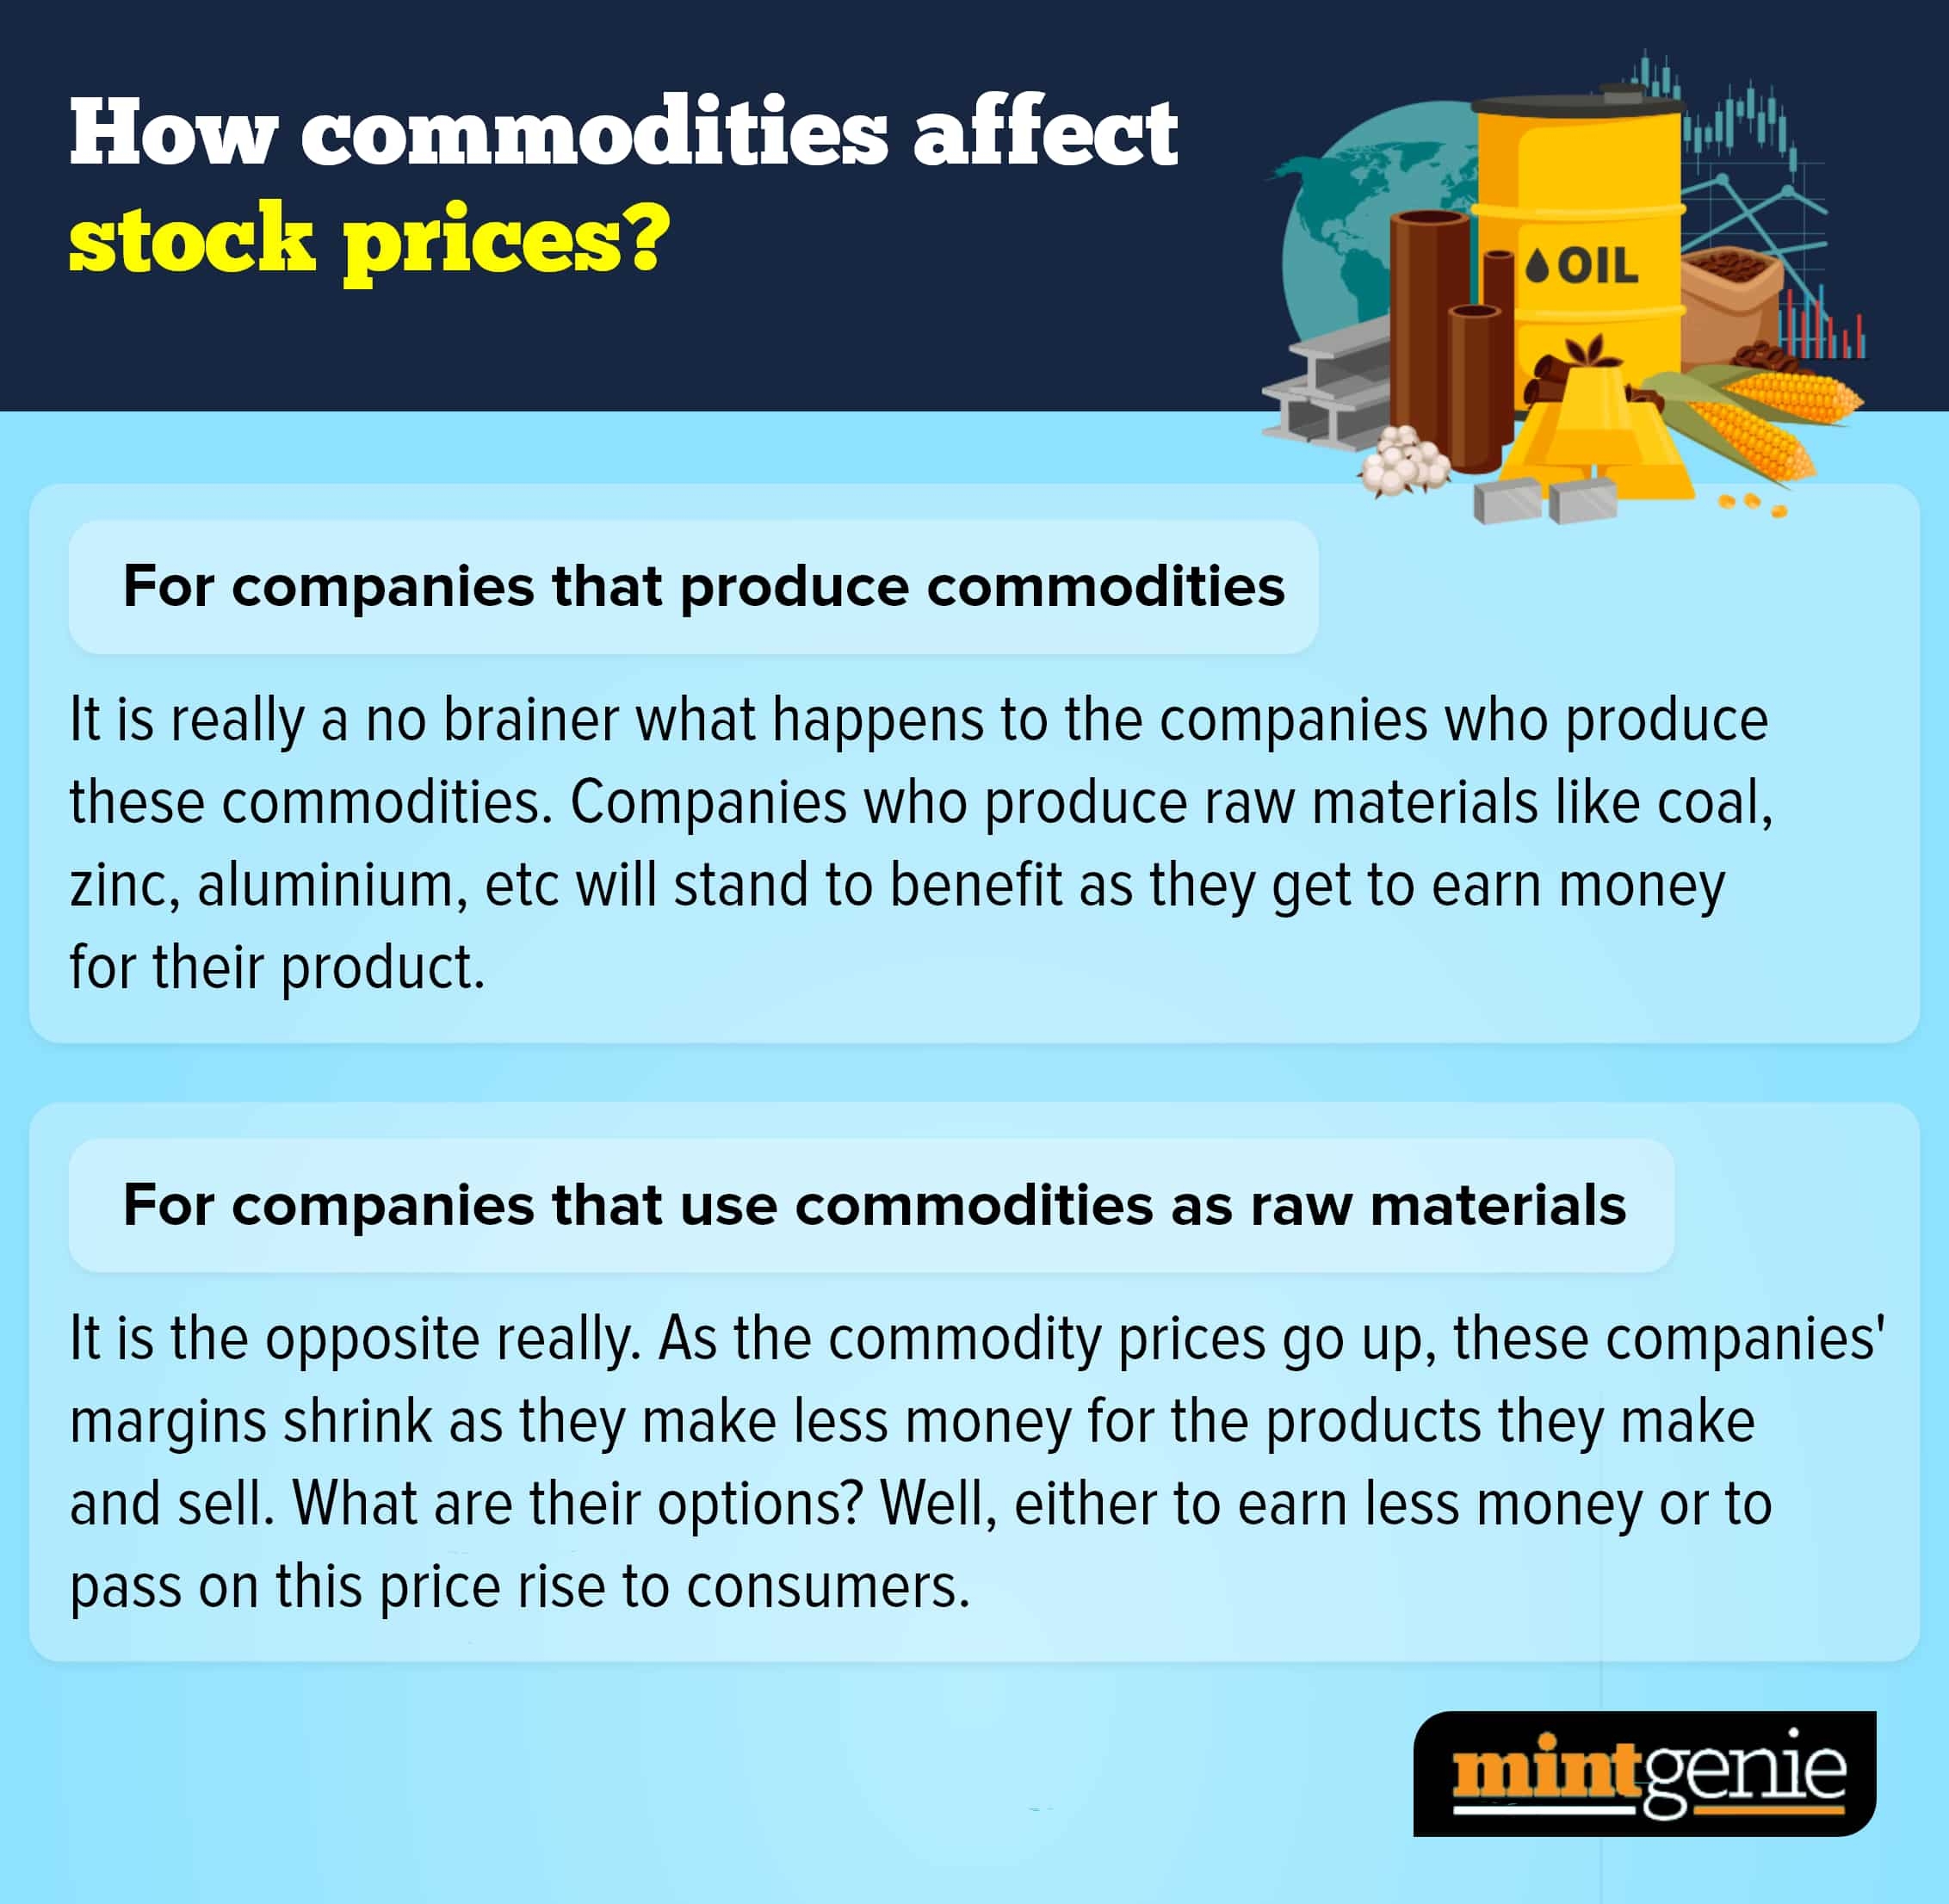 How commodities affect stock prices?